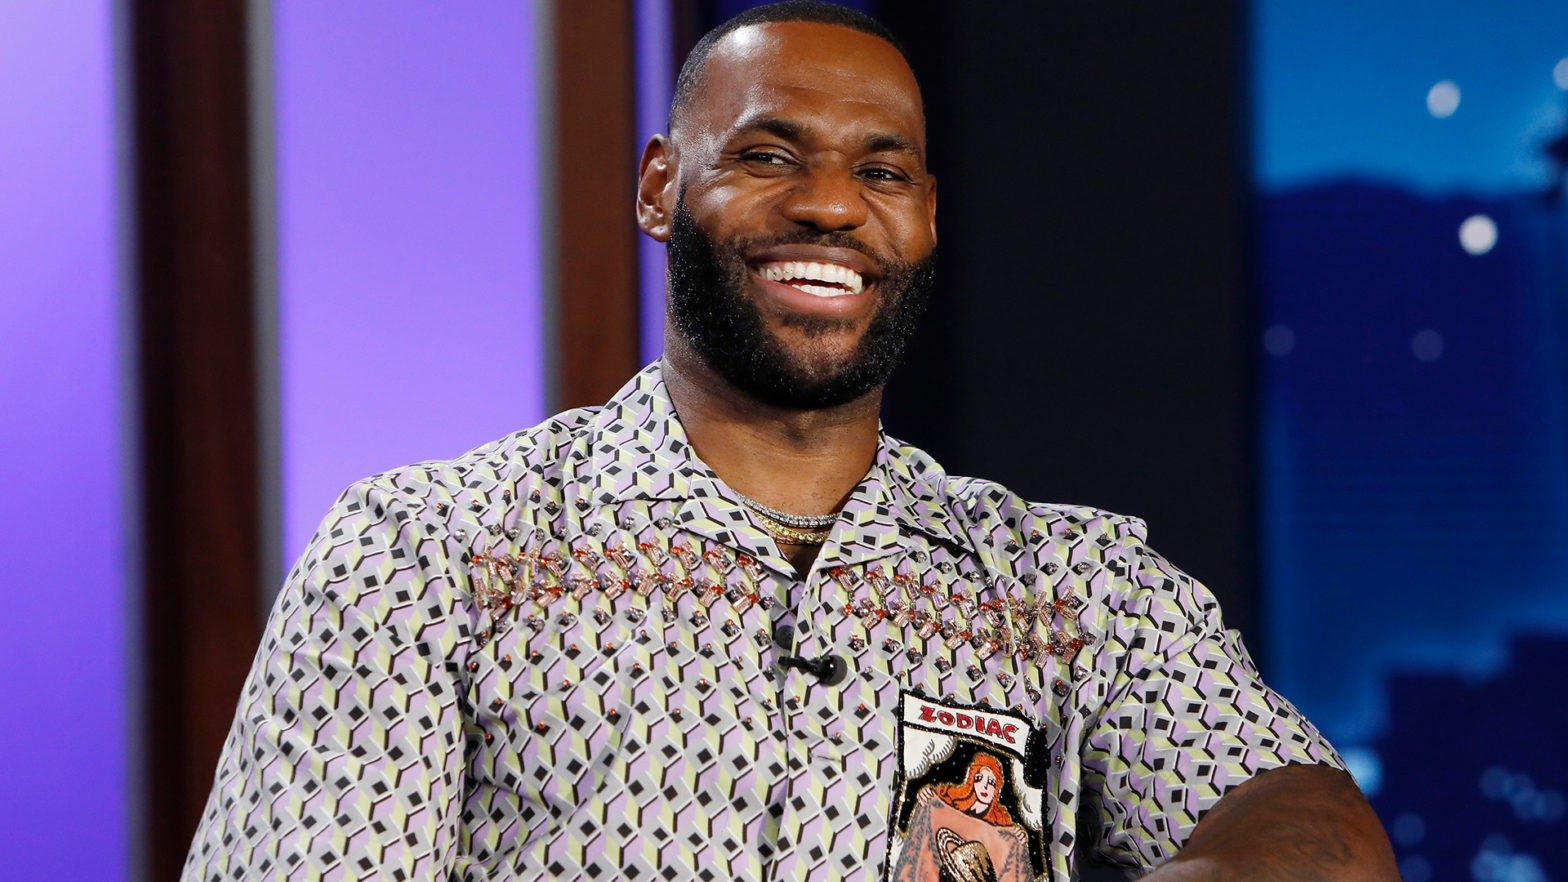 LeBron James Earned An Estimated $121M In 2021, Making Him The World's Second-Highest-Paid Athlete